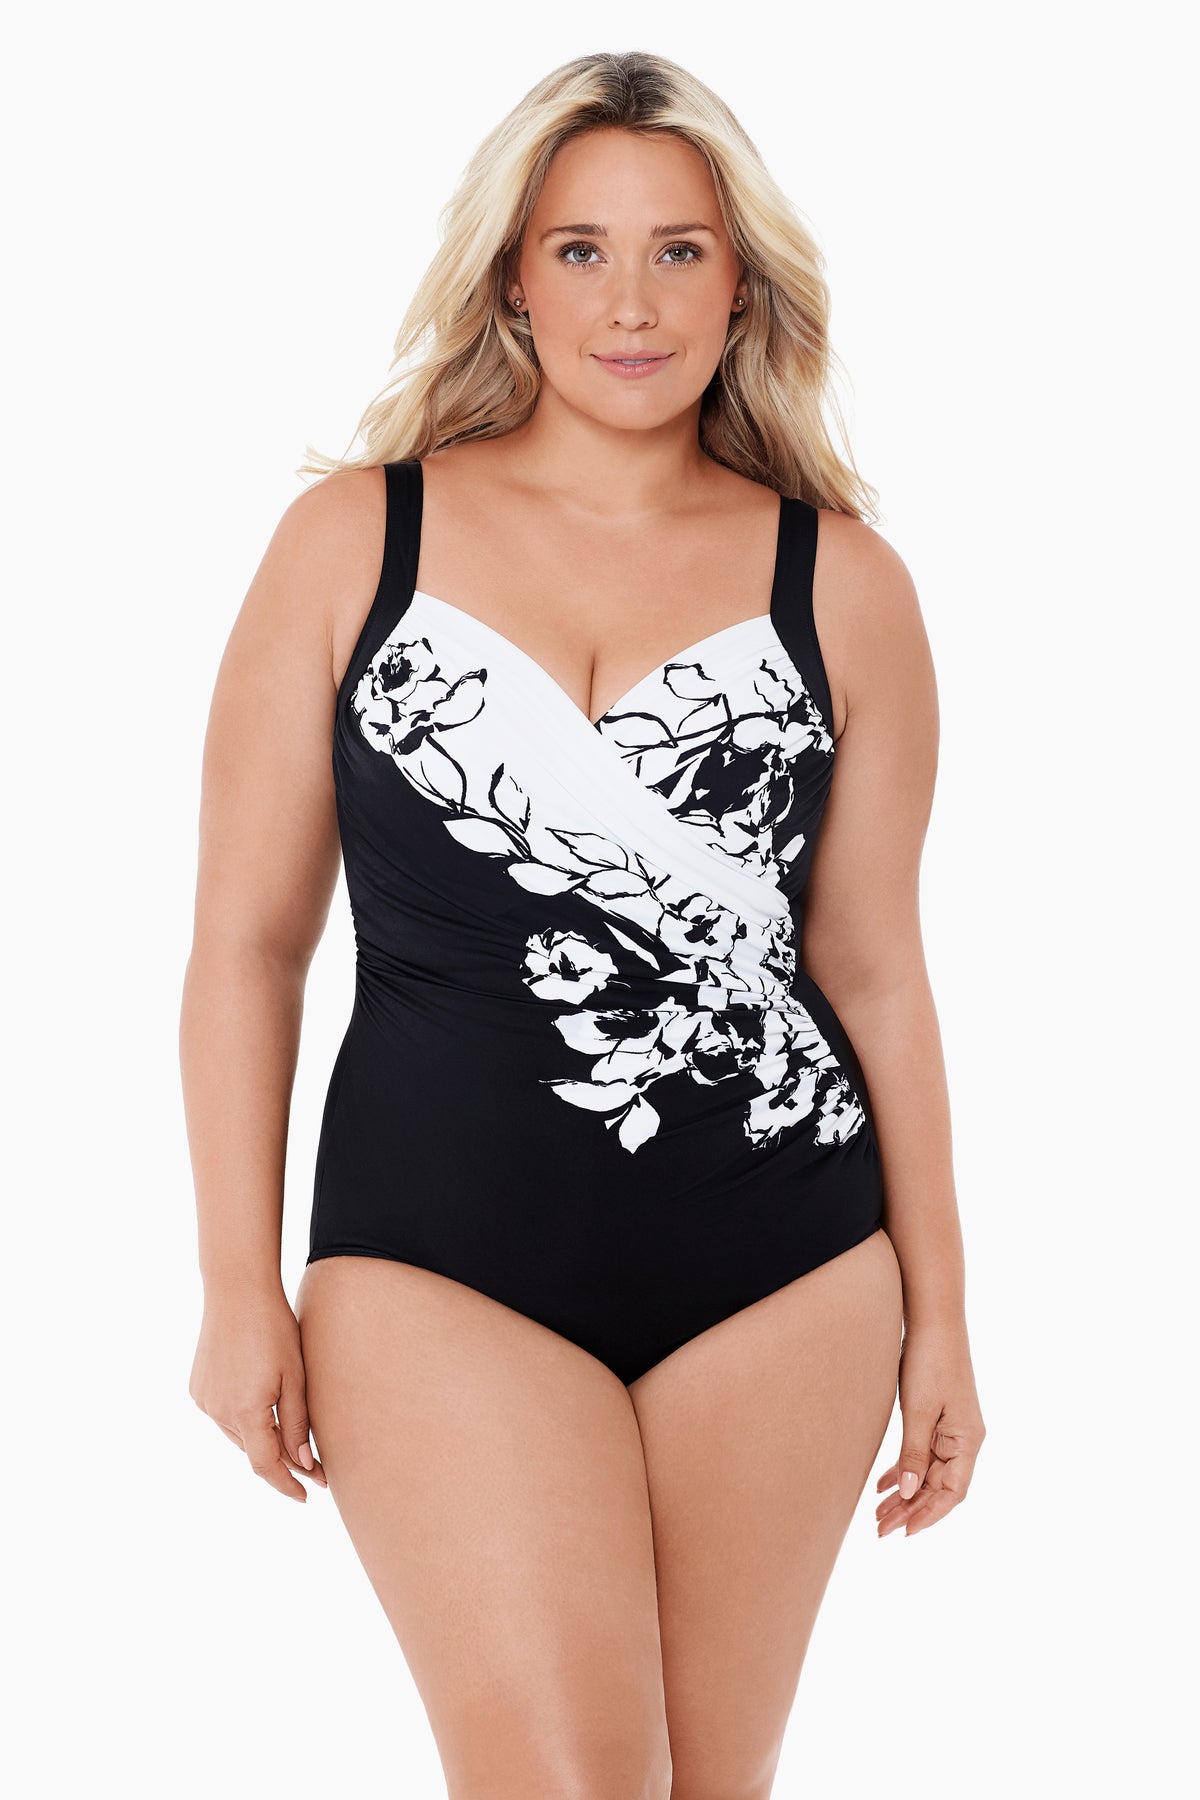 Gibobby Swimsuits for Women Tummy Control 1 Piece Plus Size One